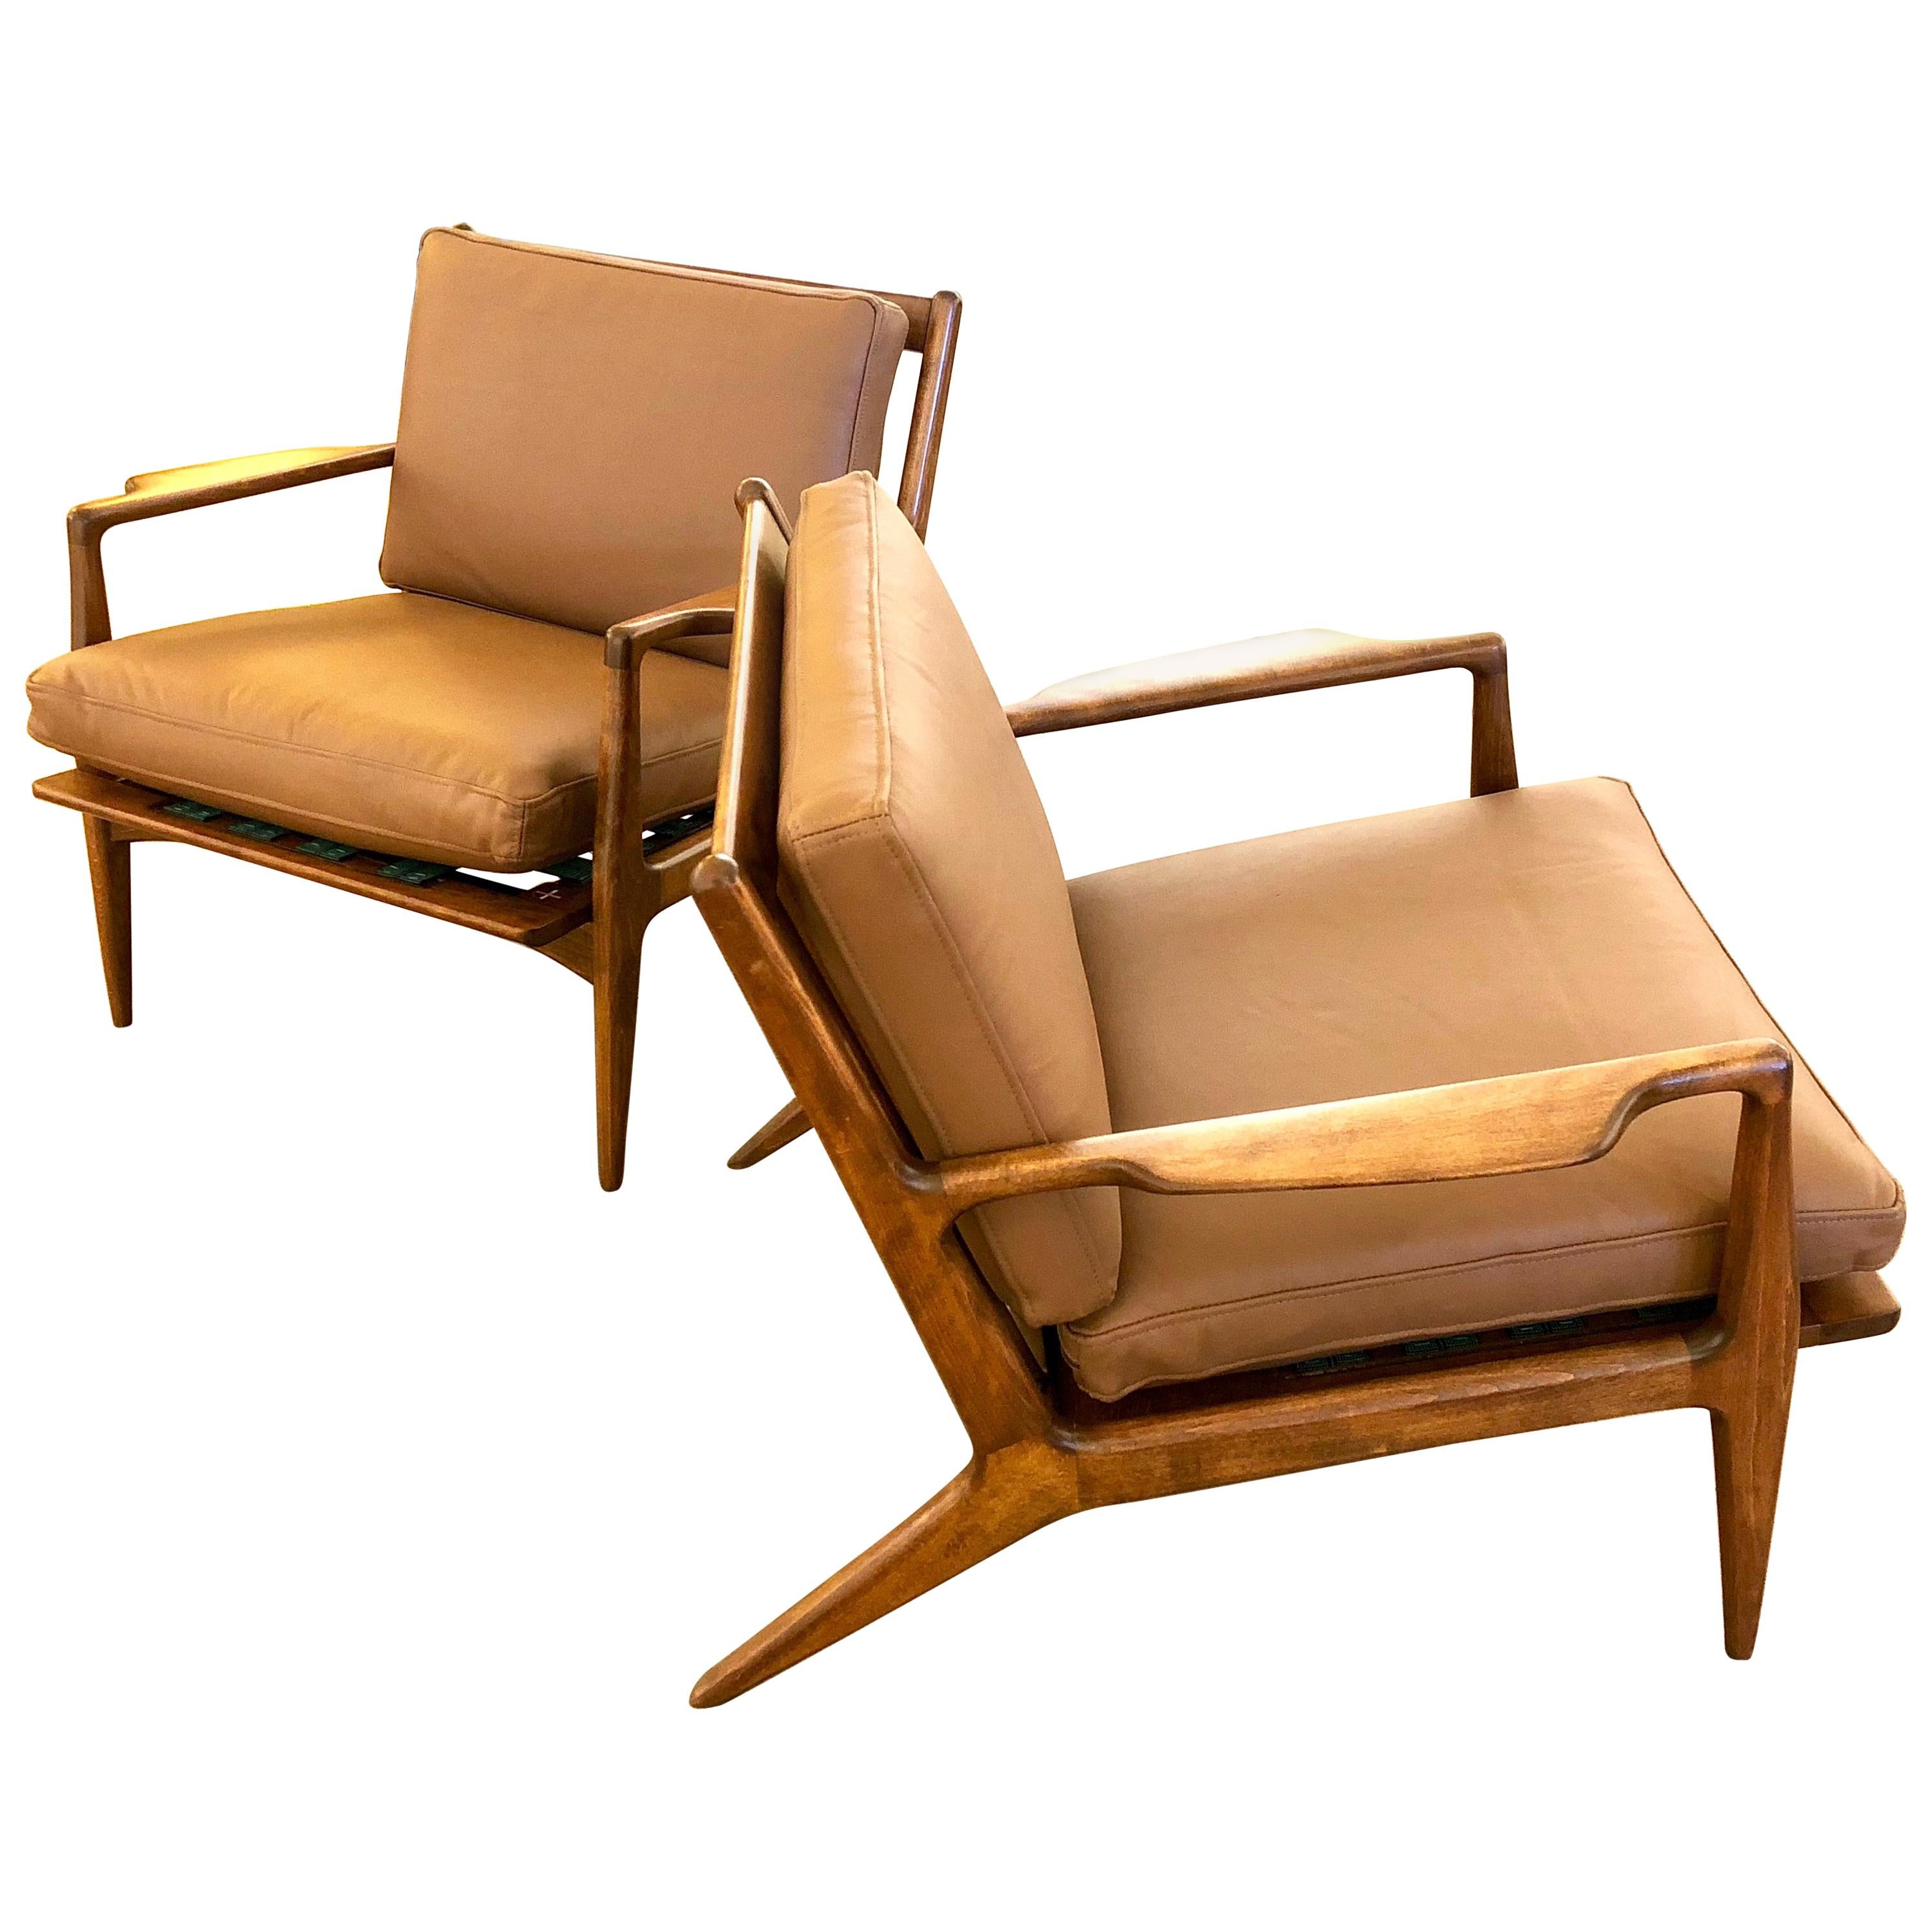 Pair of Danish Modern Lounge Chairs by Ib Kofod-Larsen in Leather